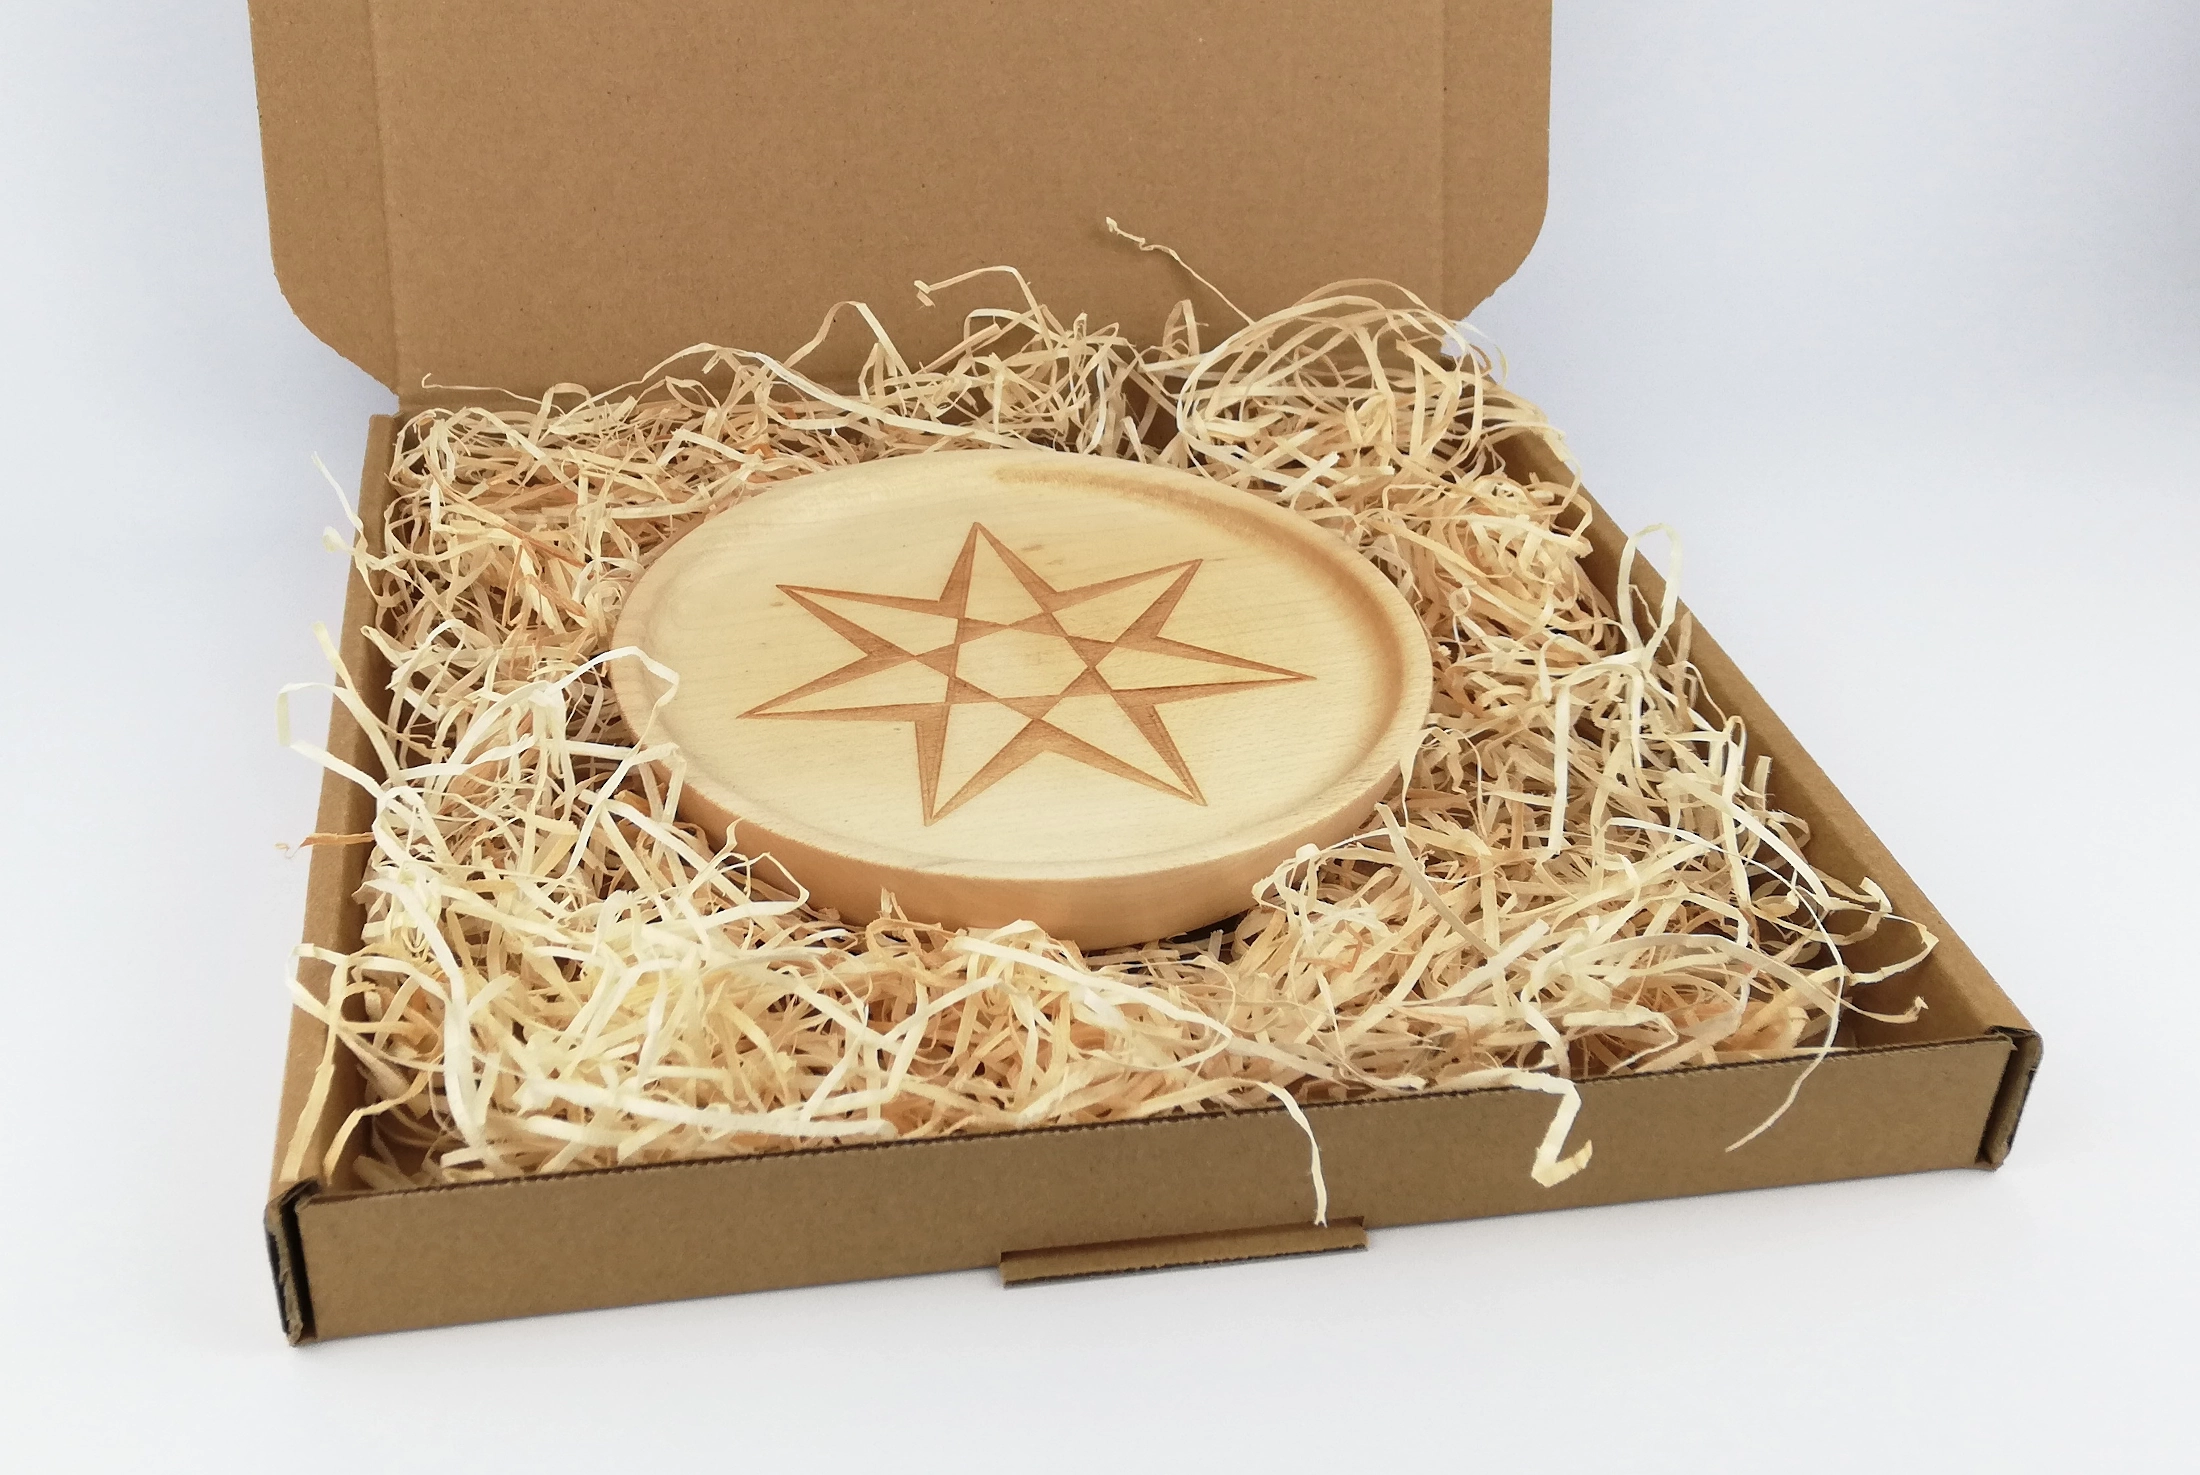 Heptagram on a small plate (16cm/6.3in in diameter), packed in a box.